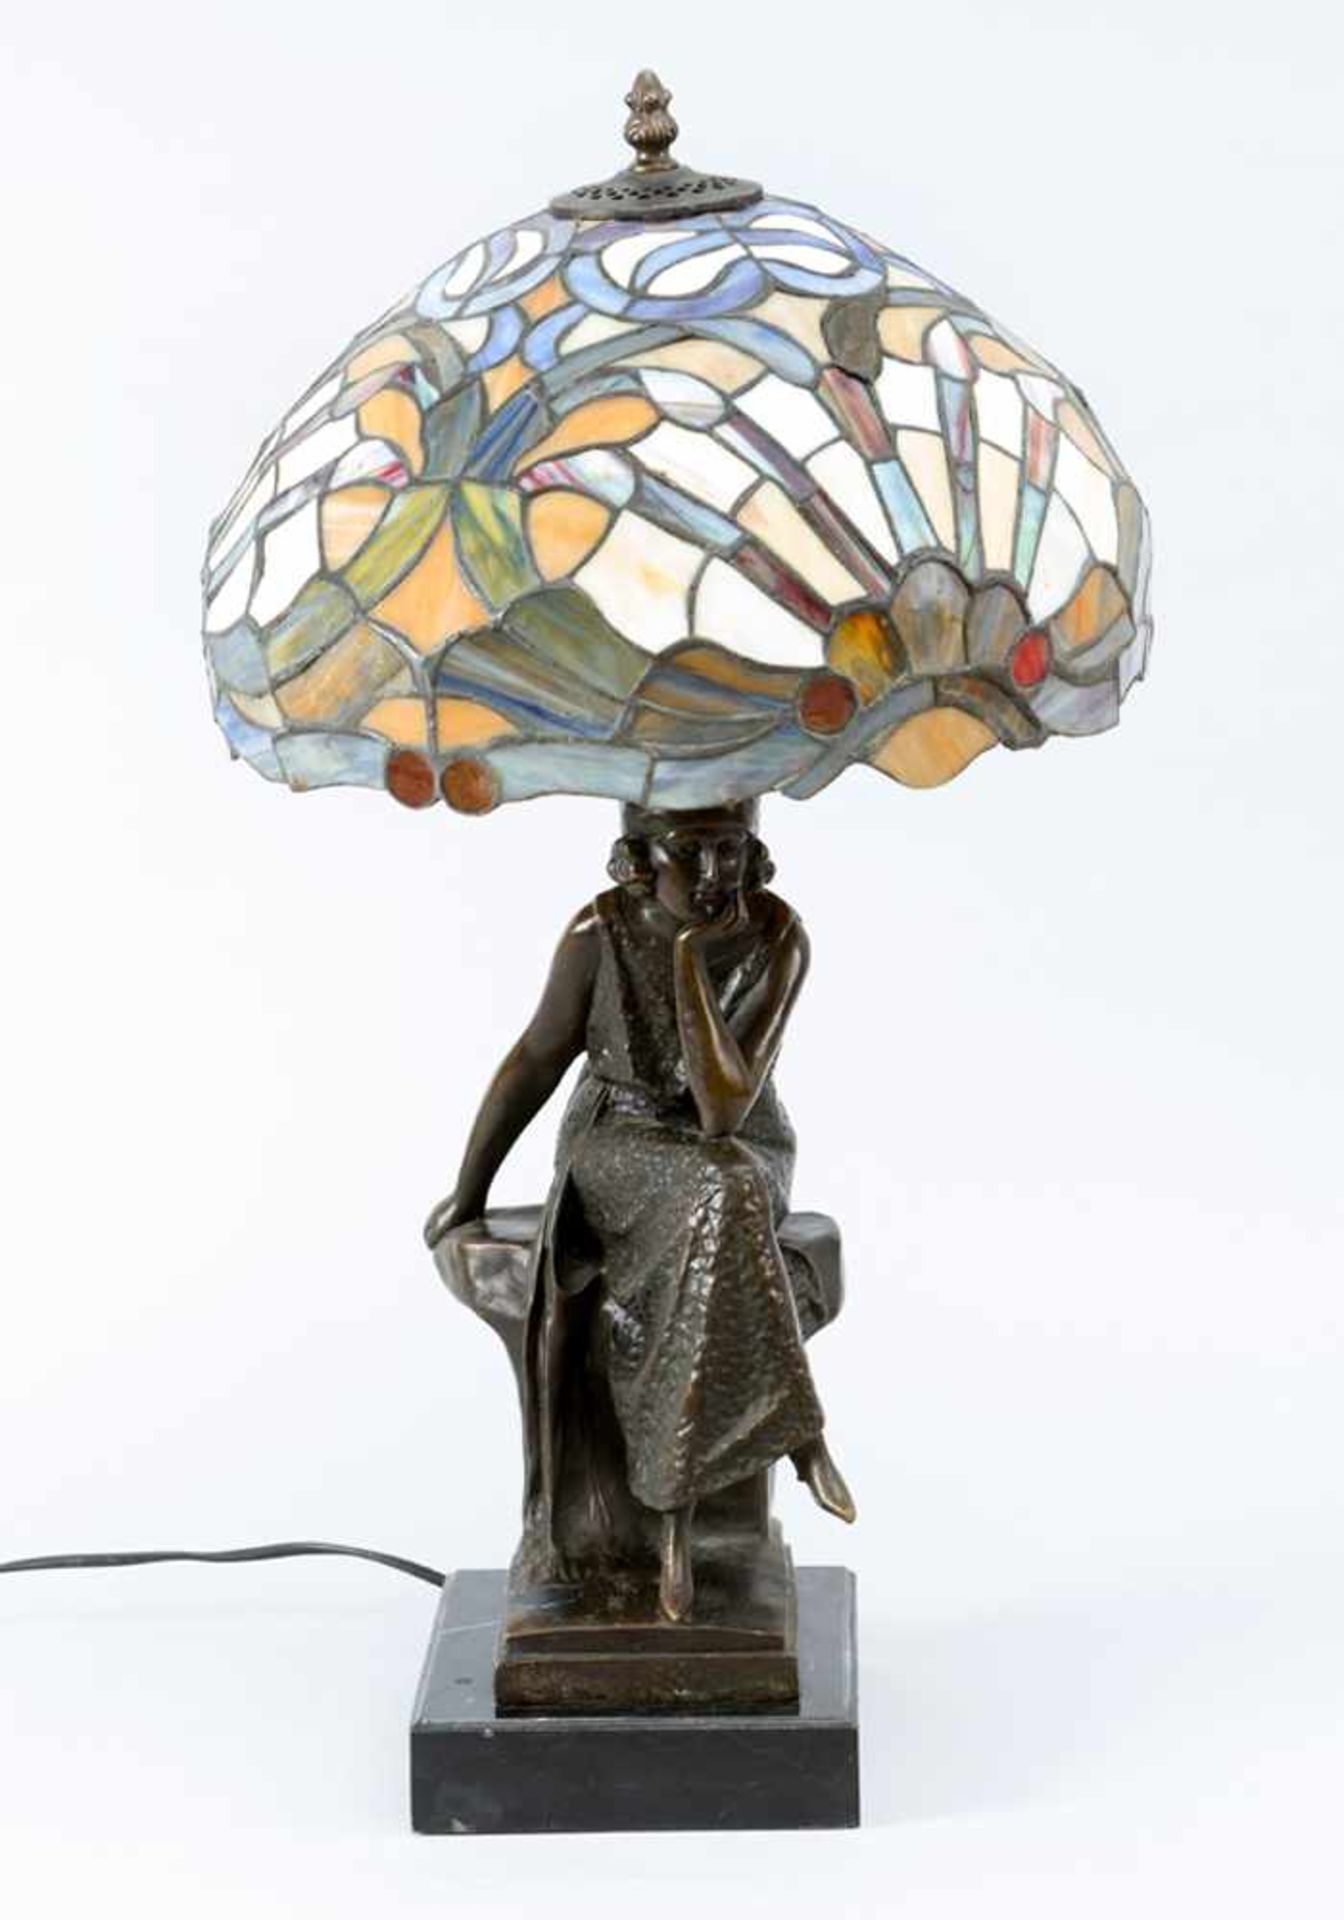 Table lamp in Liberty style